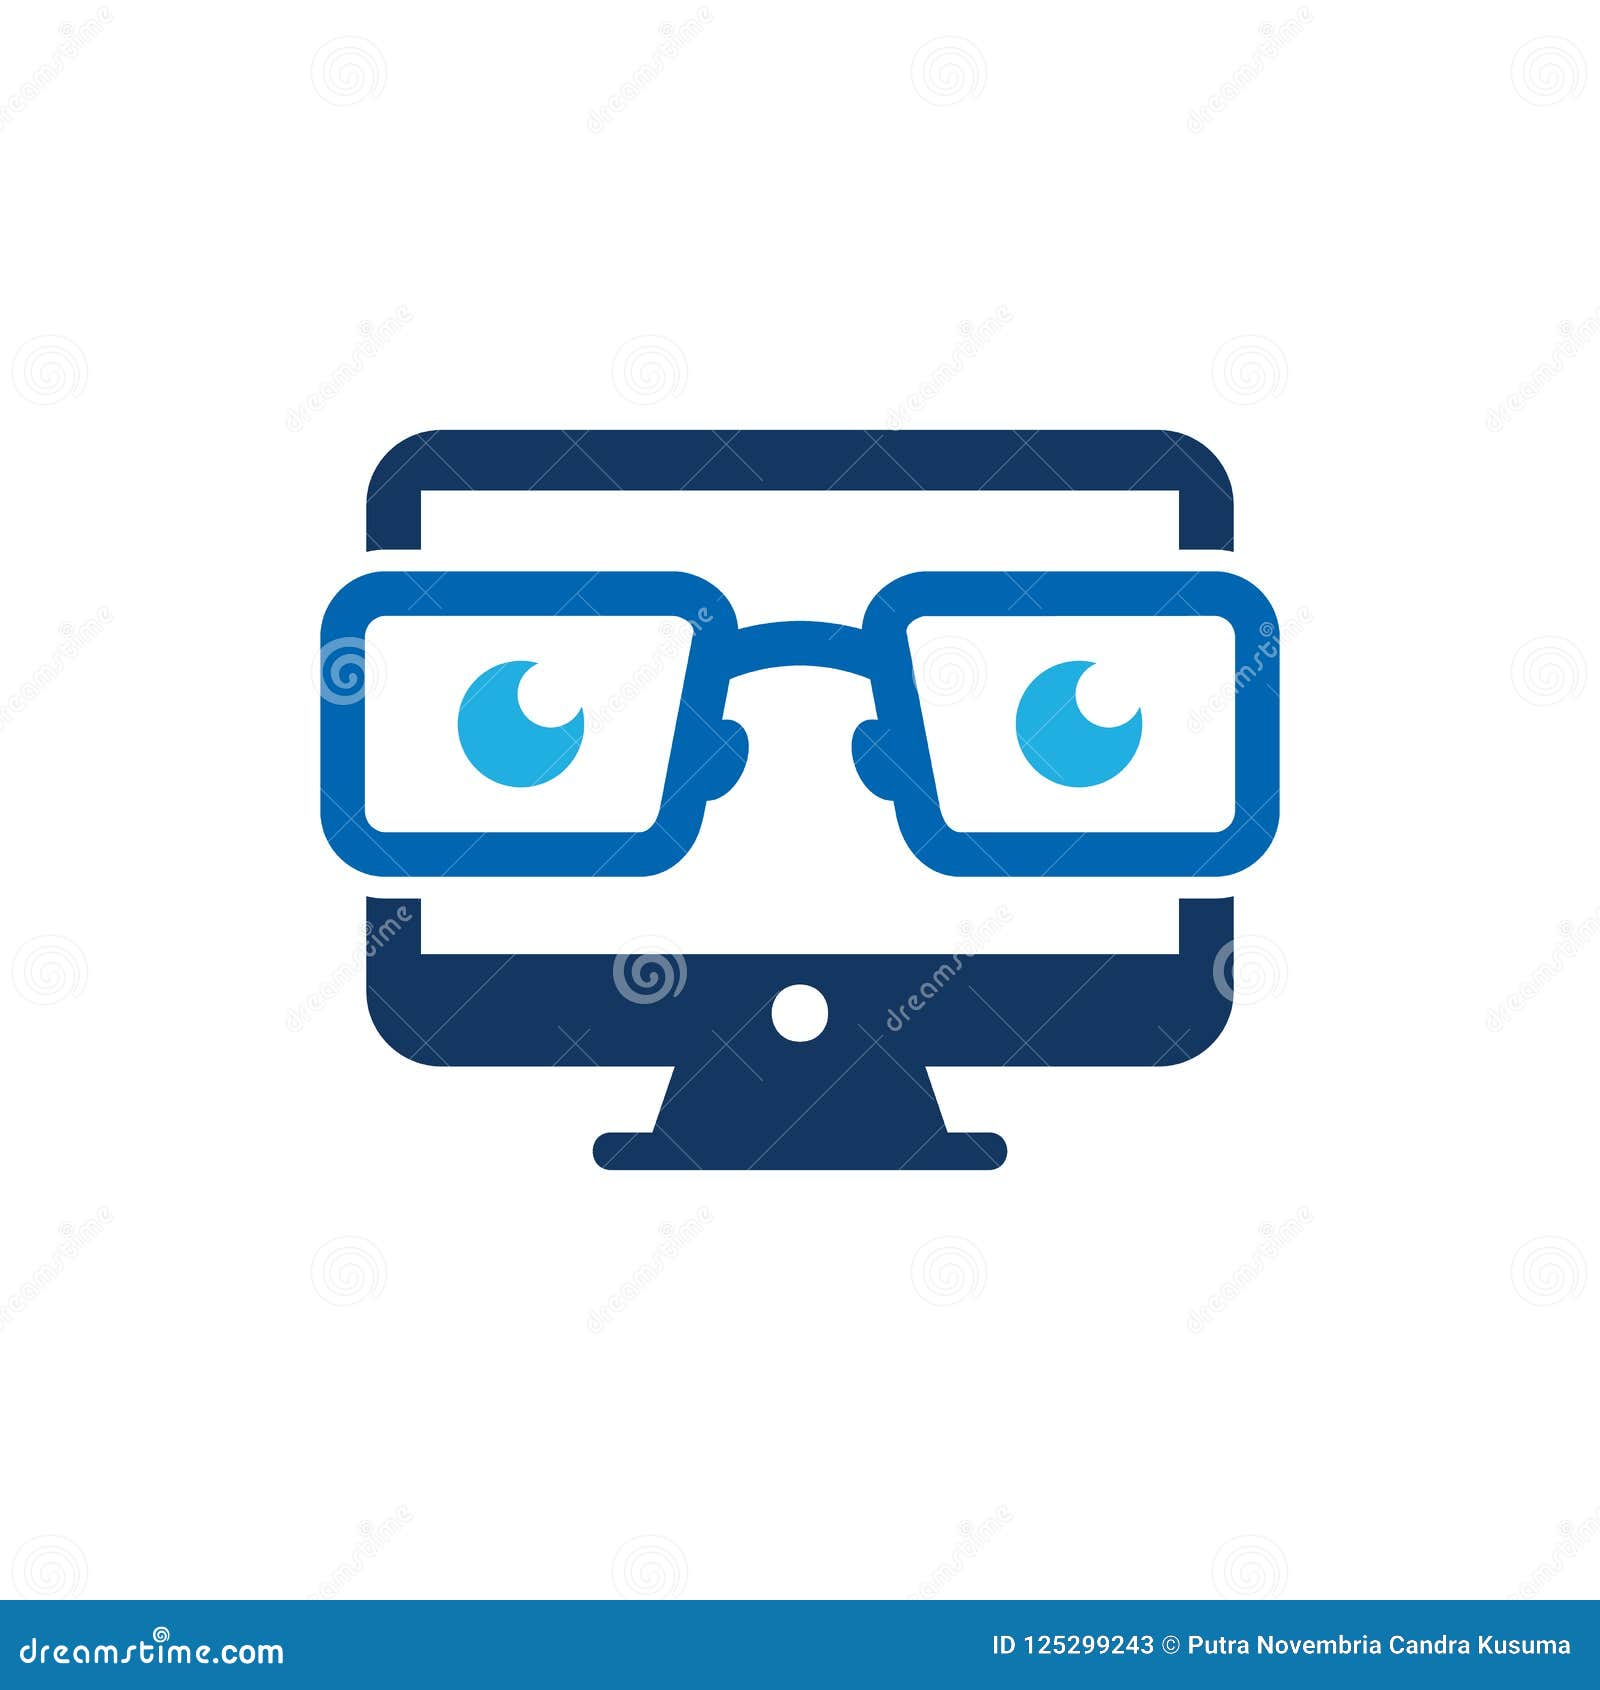 Download Geek Computer Logo Icon Design Stock Vector - Illustration of device, club: 125299243